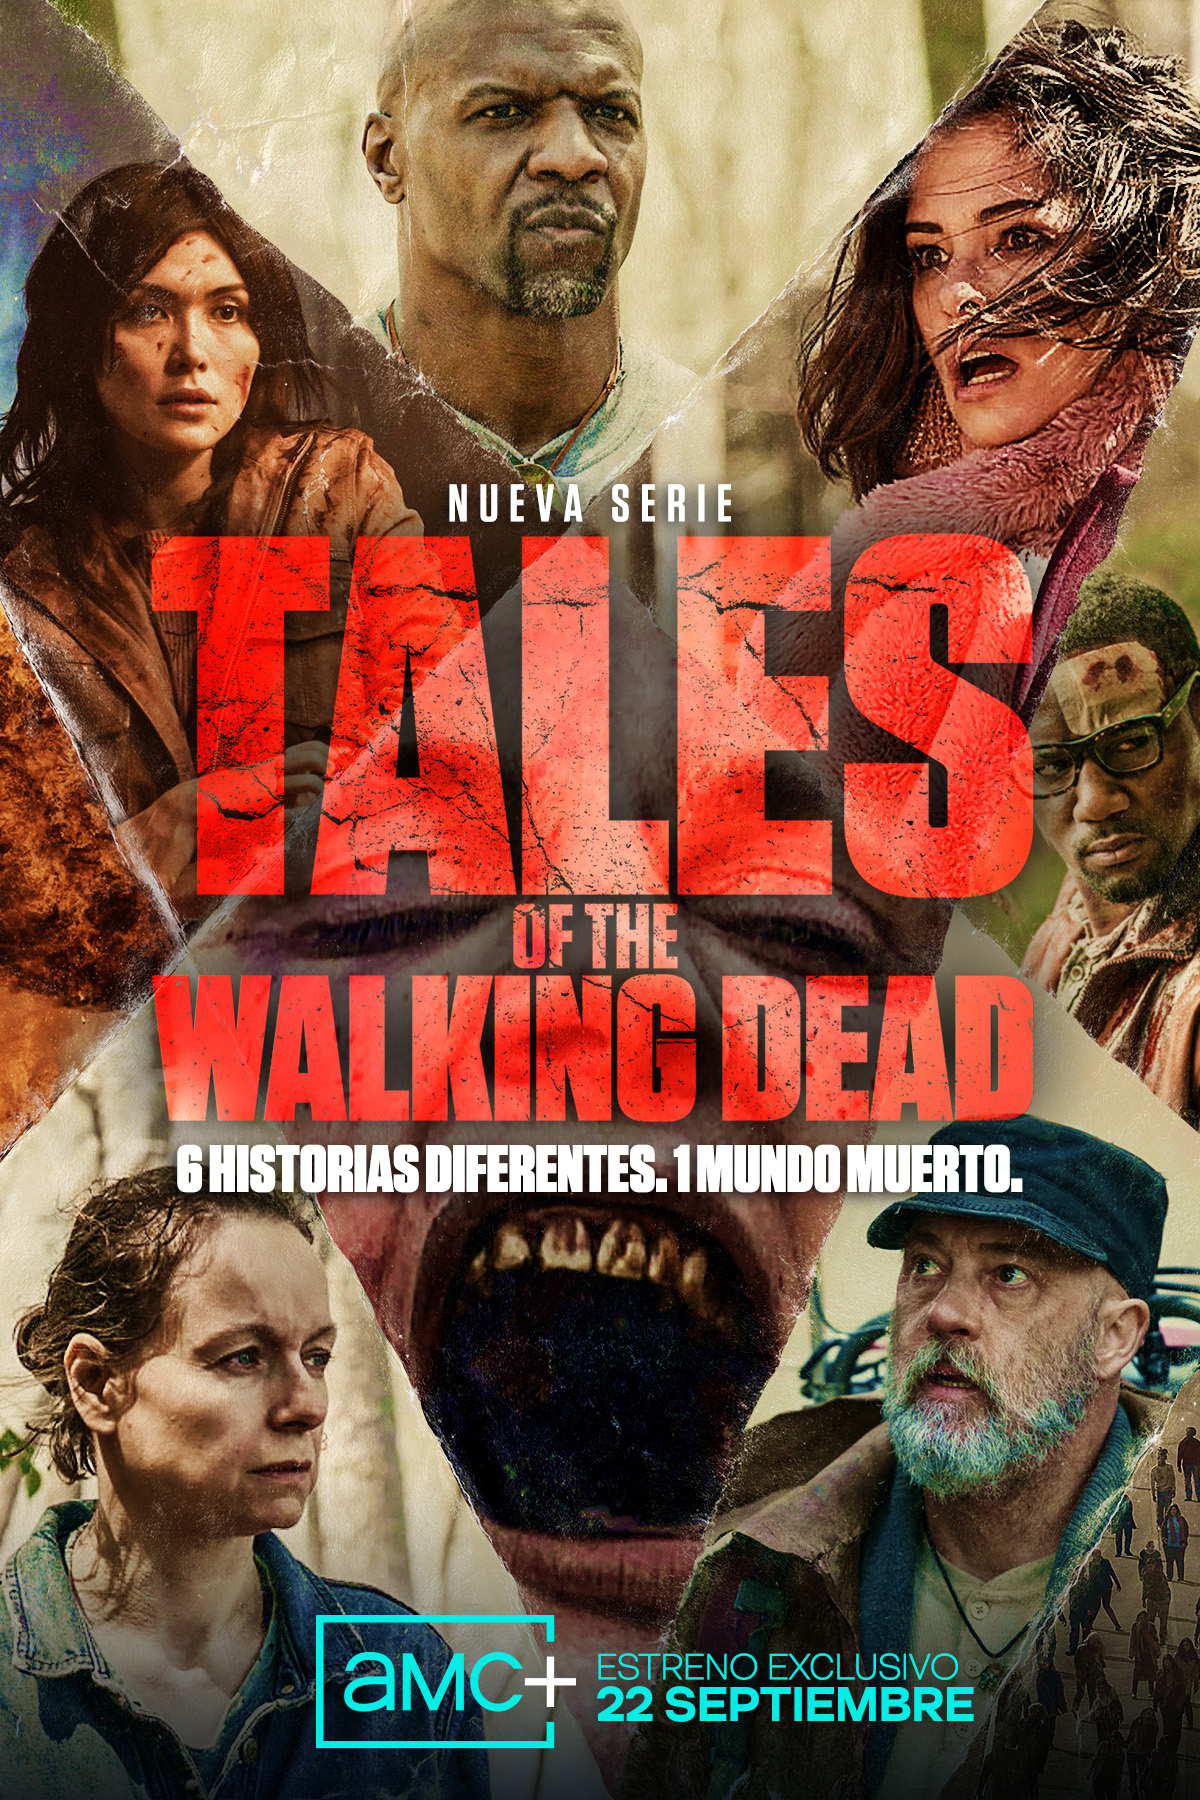 Tales of The Walking Dead - Série TV 2022 streaming VF gratuit complet